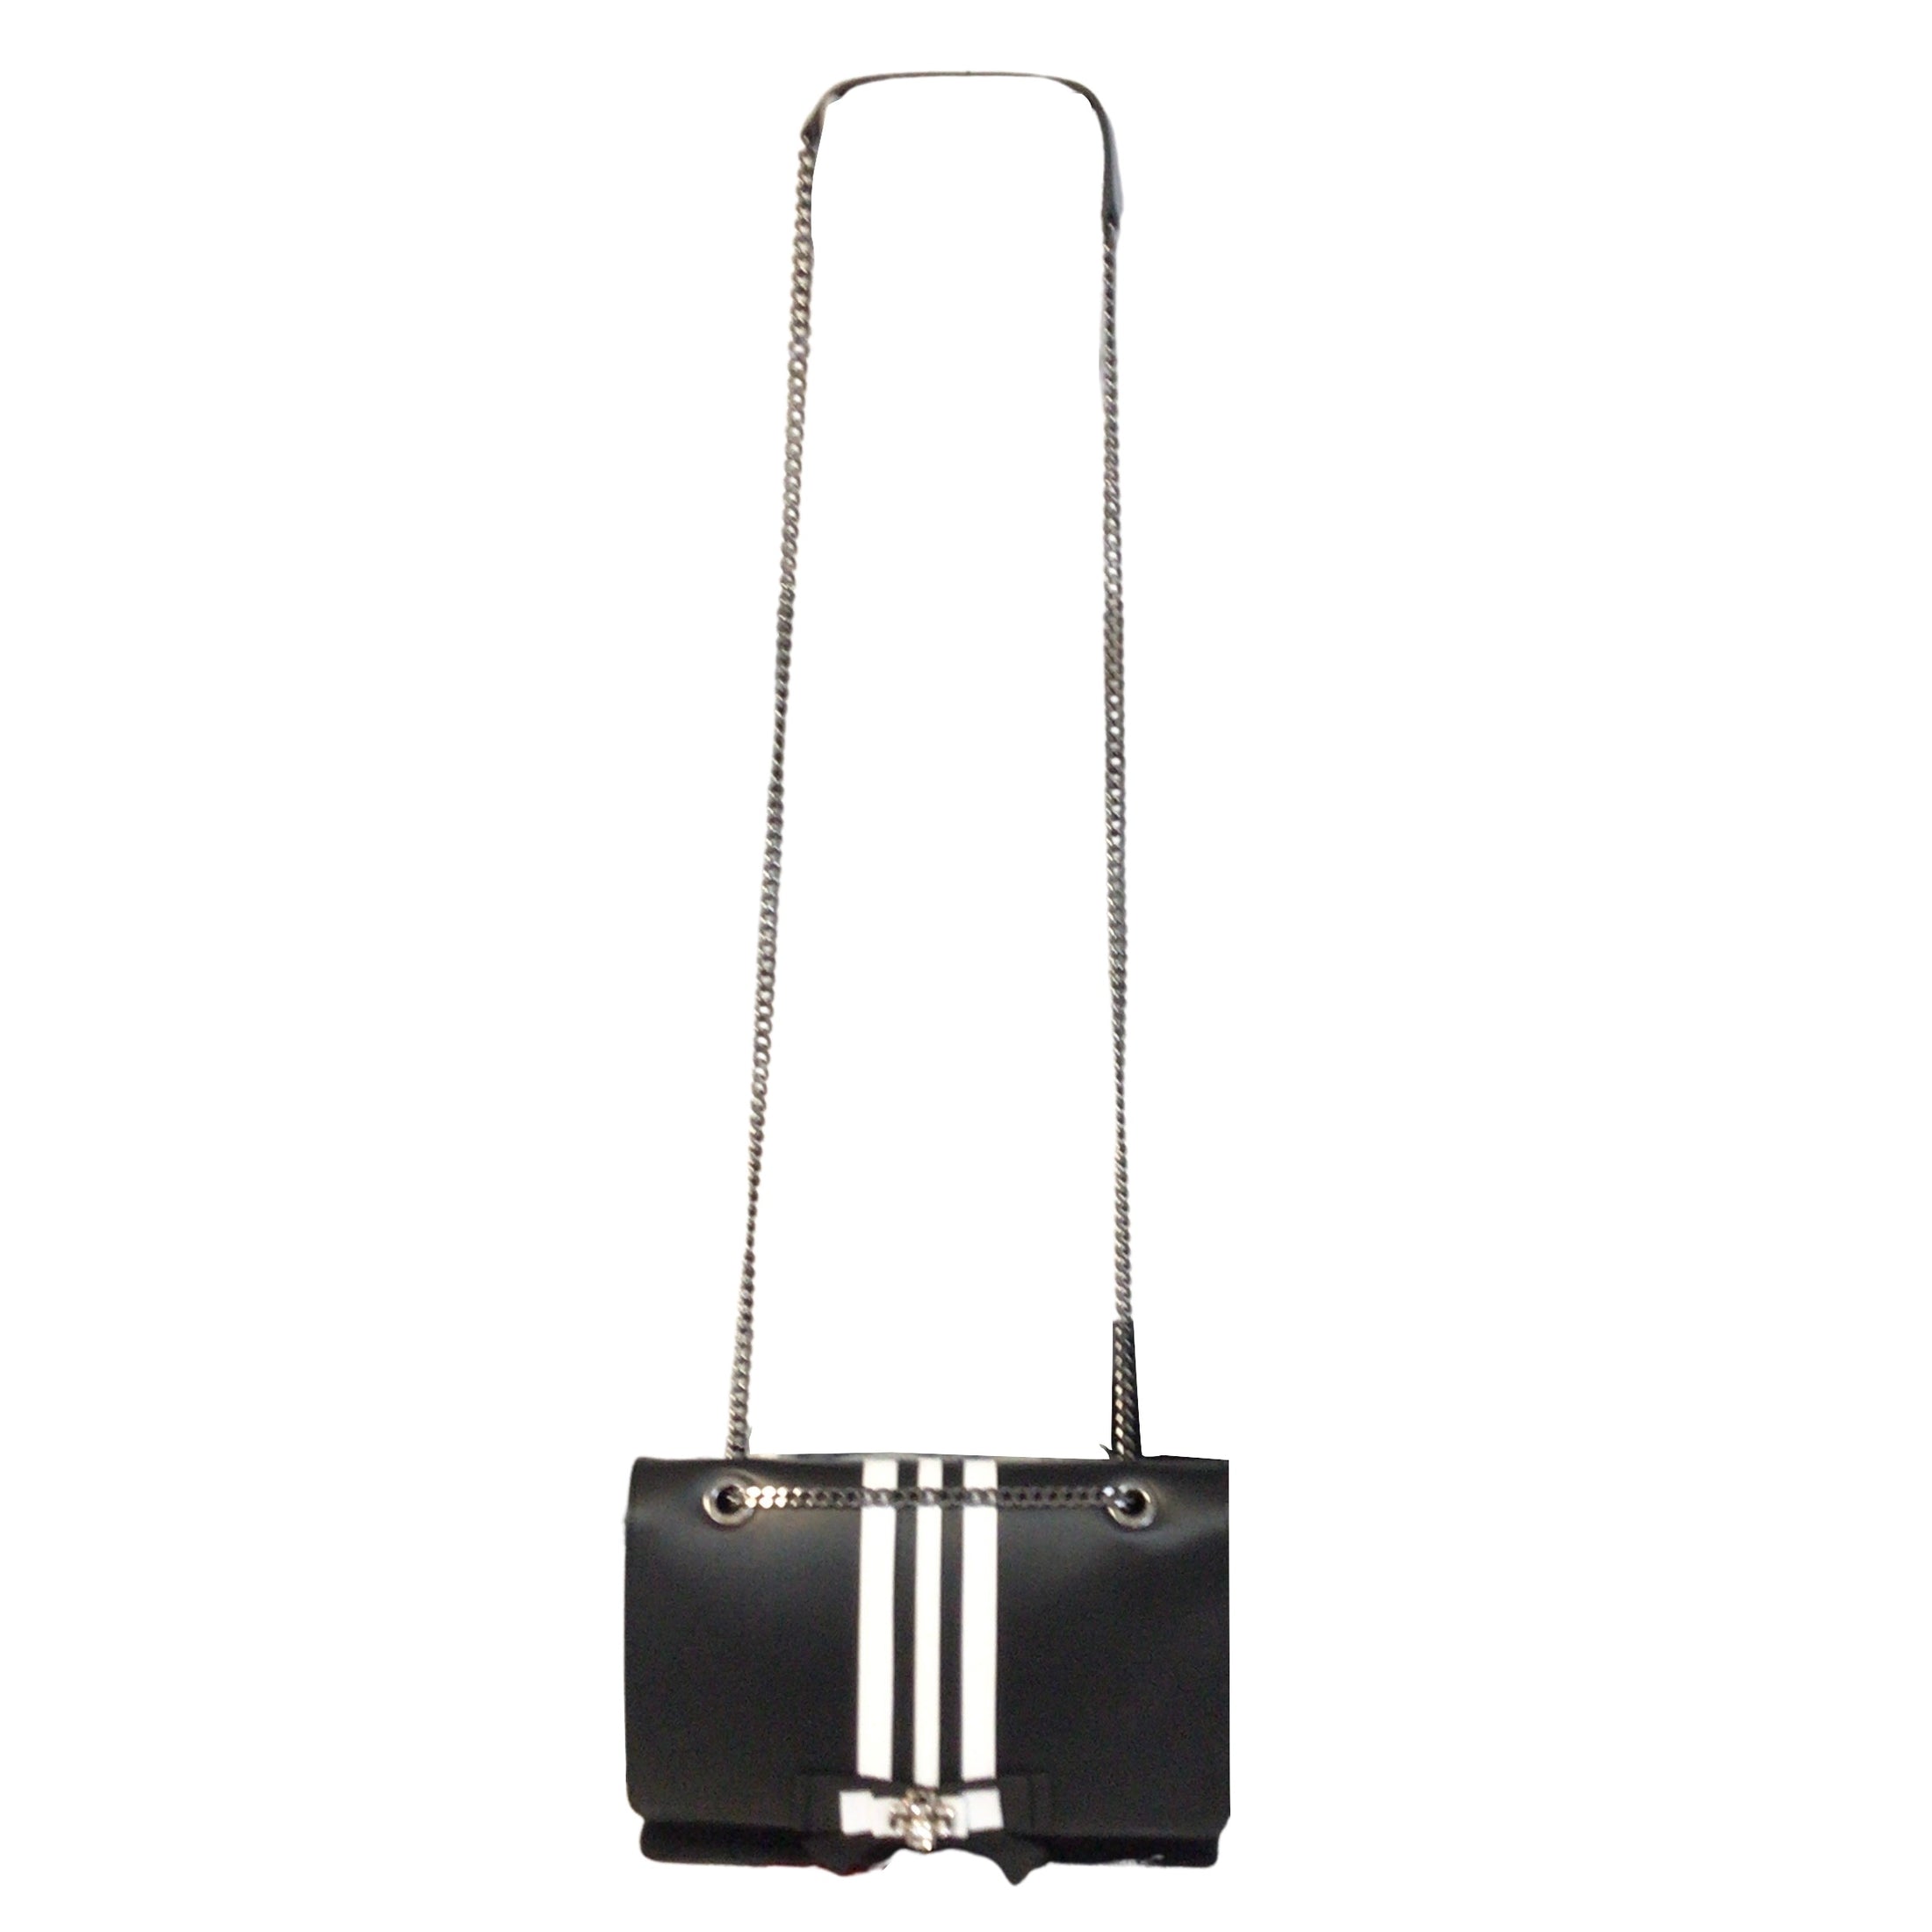 Anne Fontaine Black / White Onight Crystal Embellished Calfksin Leather and Suede Shoulder Bag